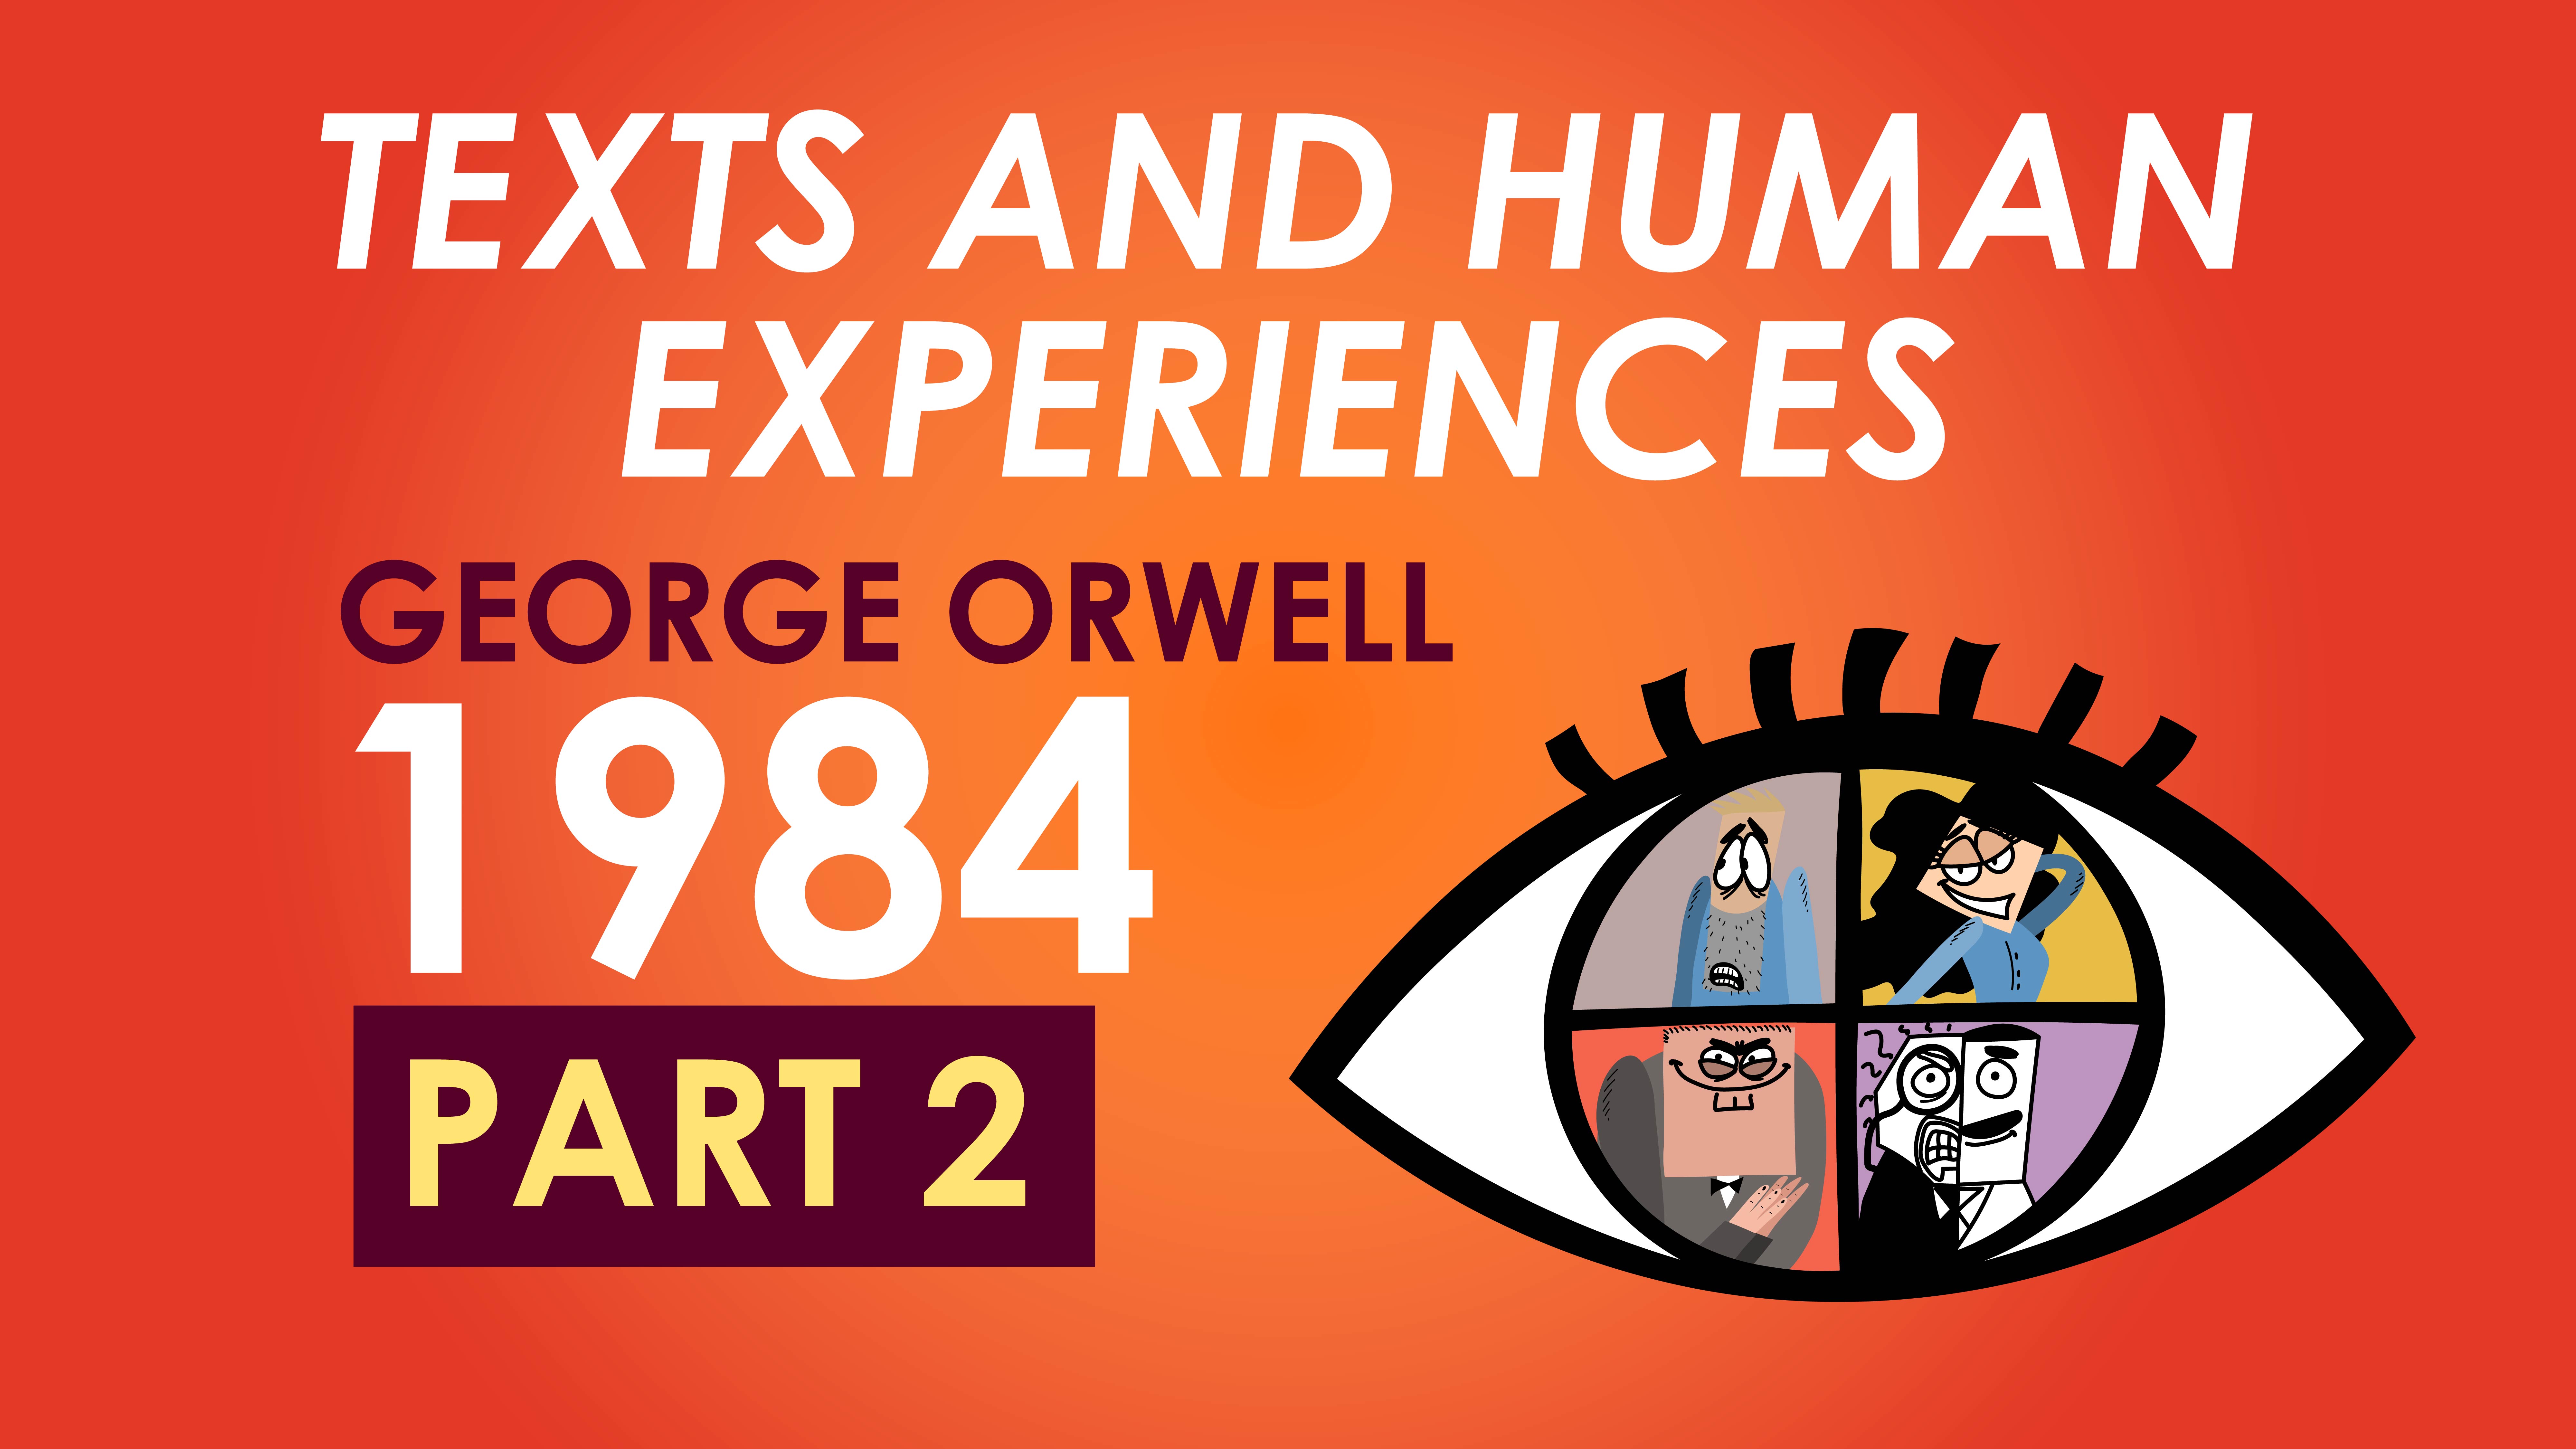 HSC Texts and Human Experiences - 1984, by George Orwell - Part 2